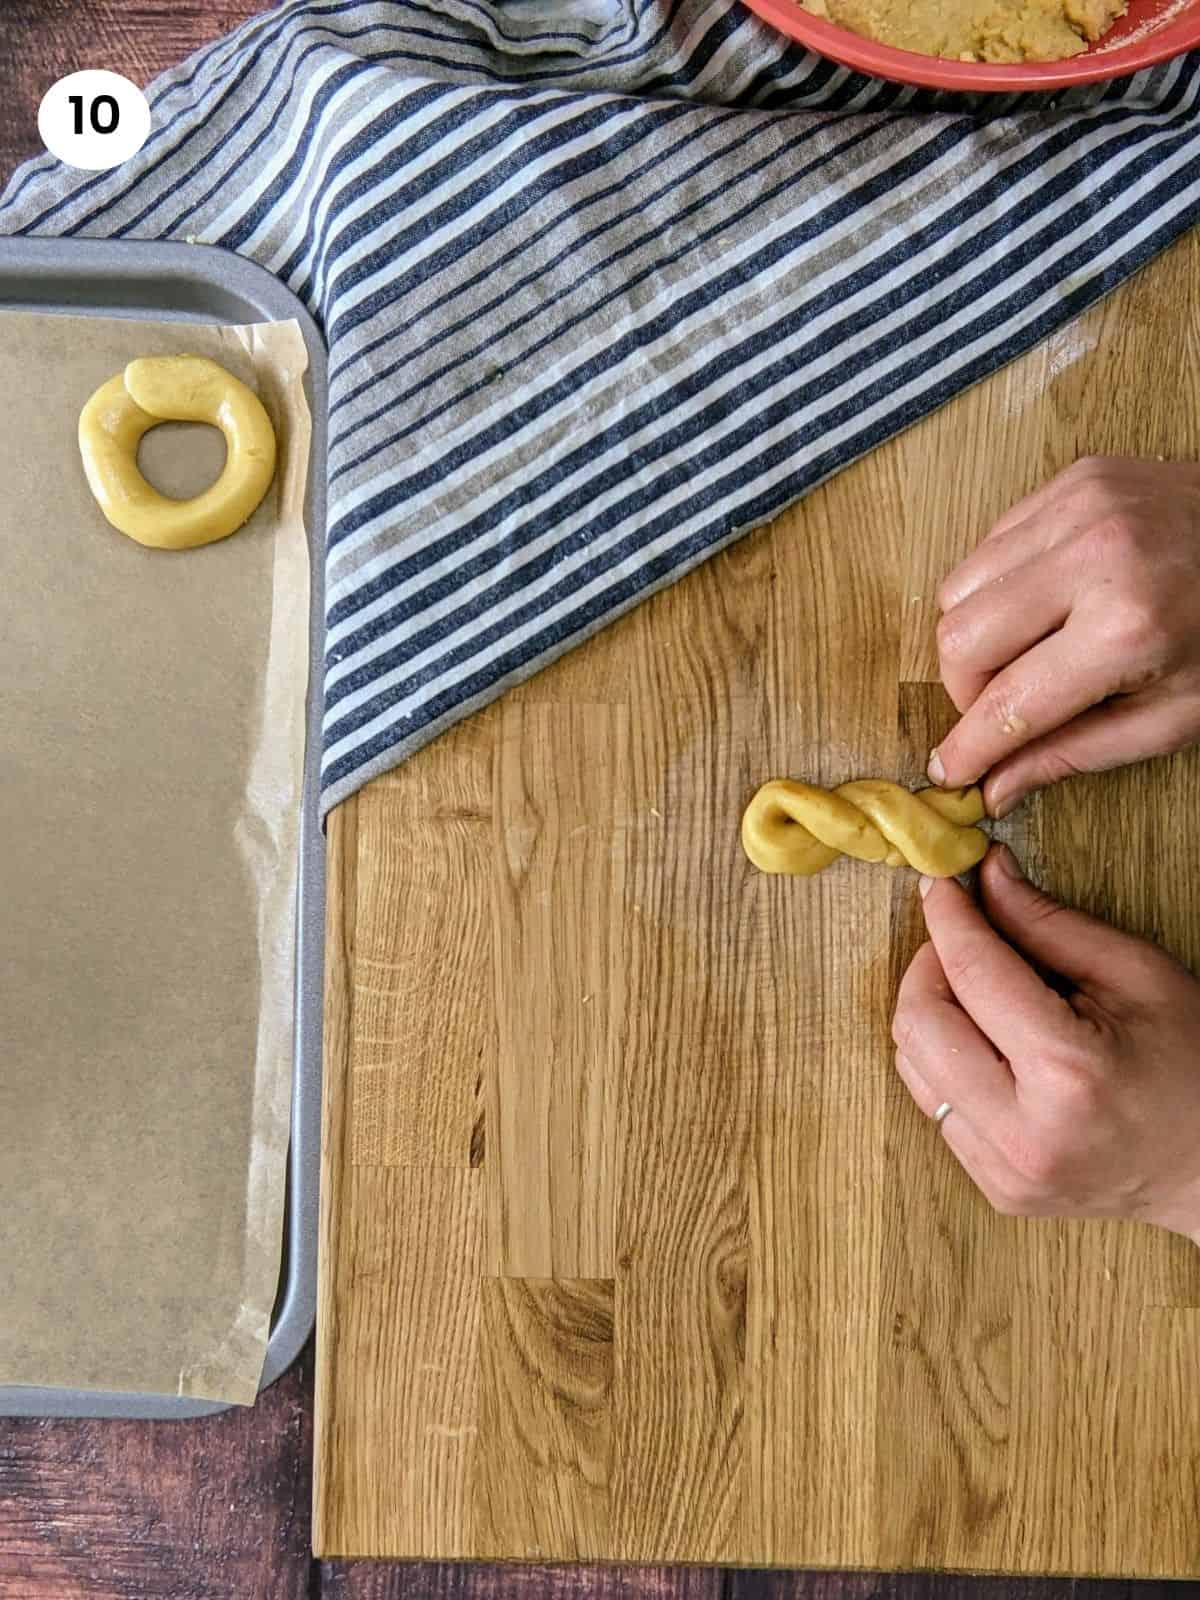 Shaping cookie dough into braid.